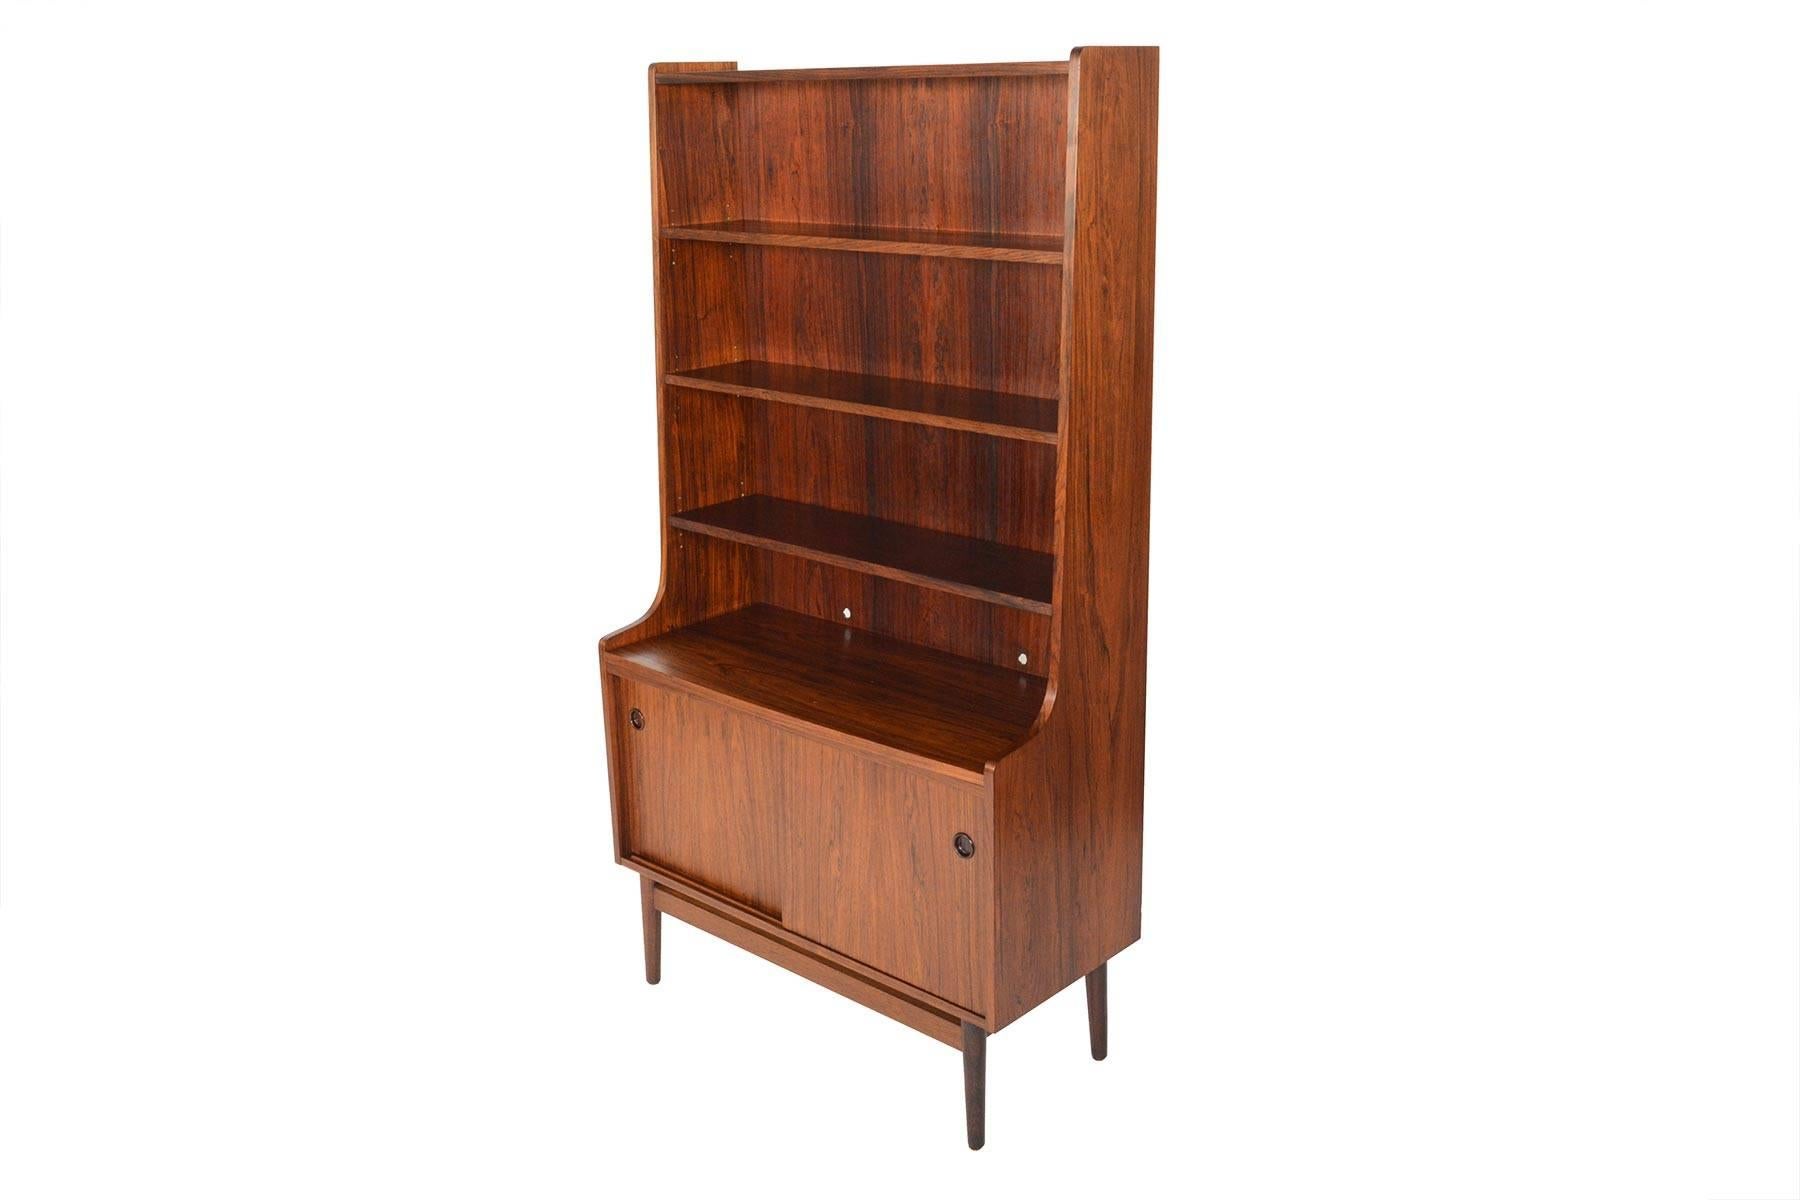 Danish Modern Midcentury Bookcase in Rosewood by Johannes Sorth #3 1